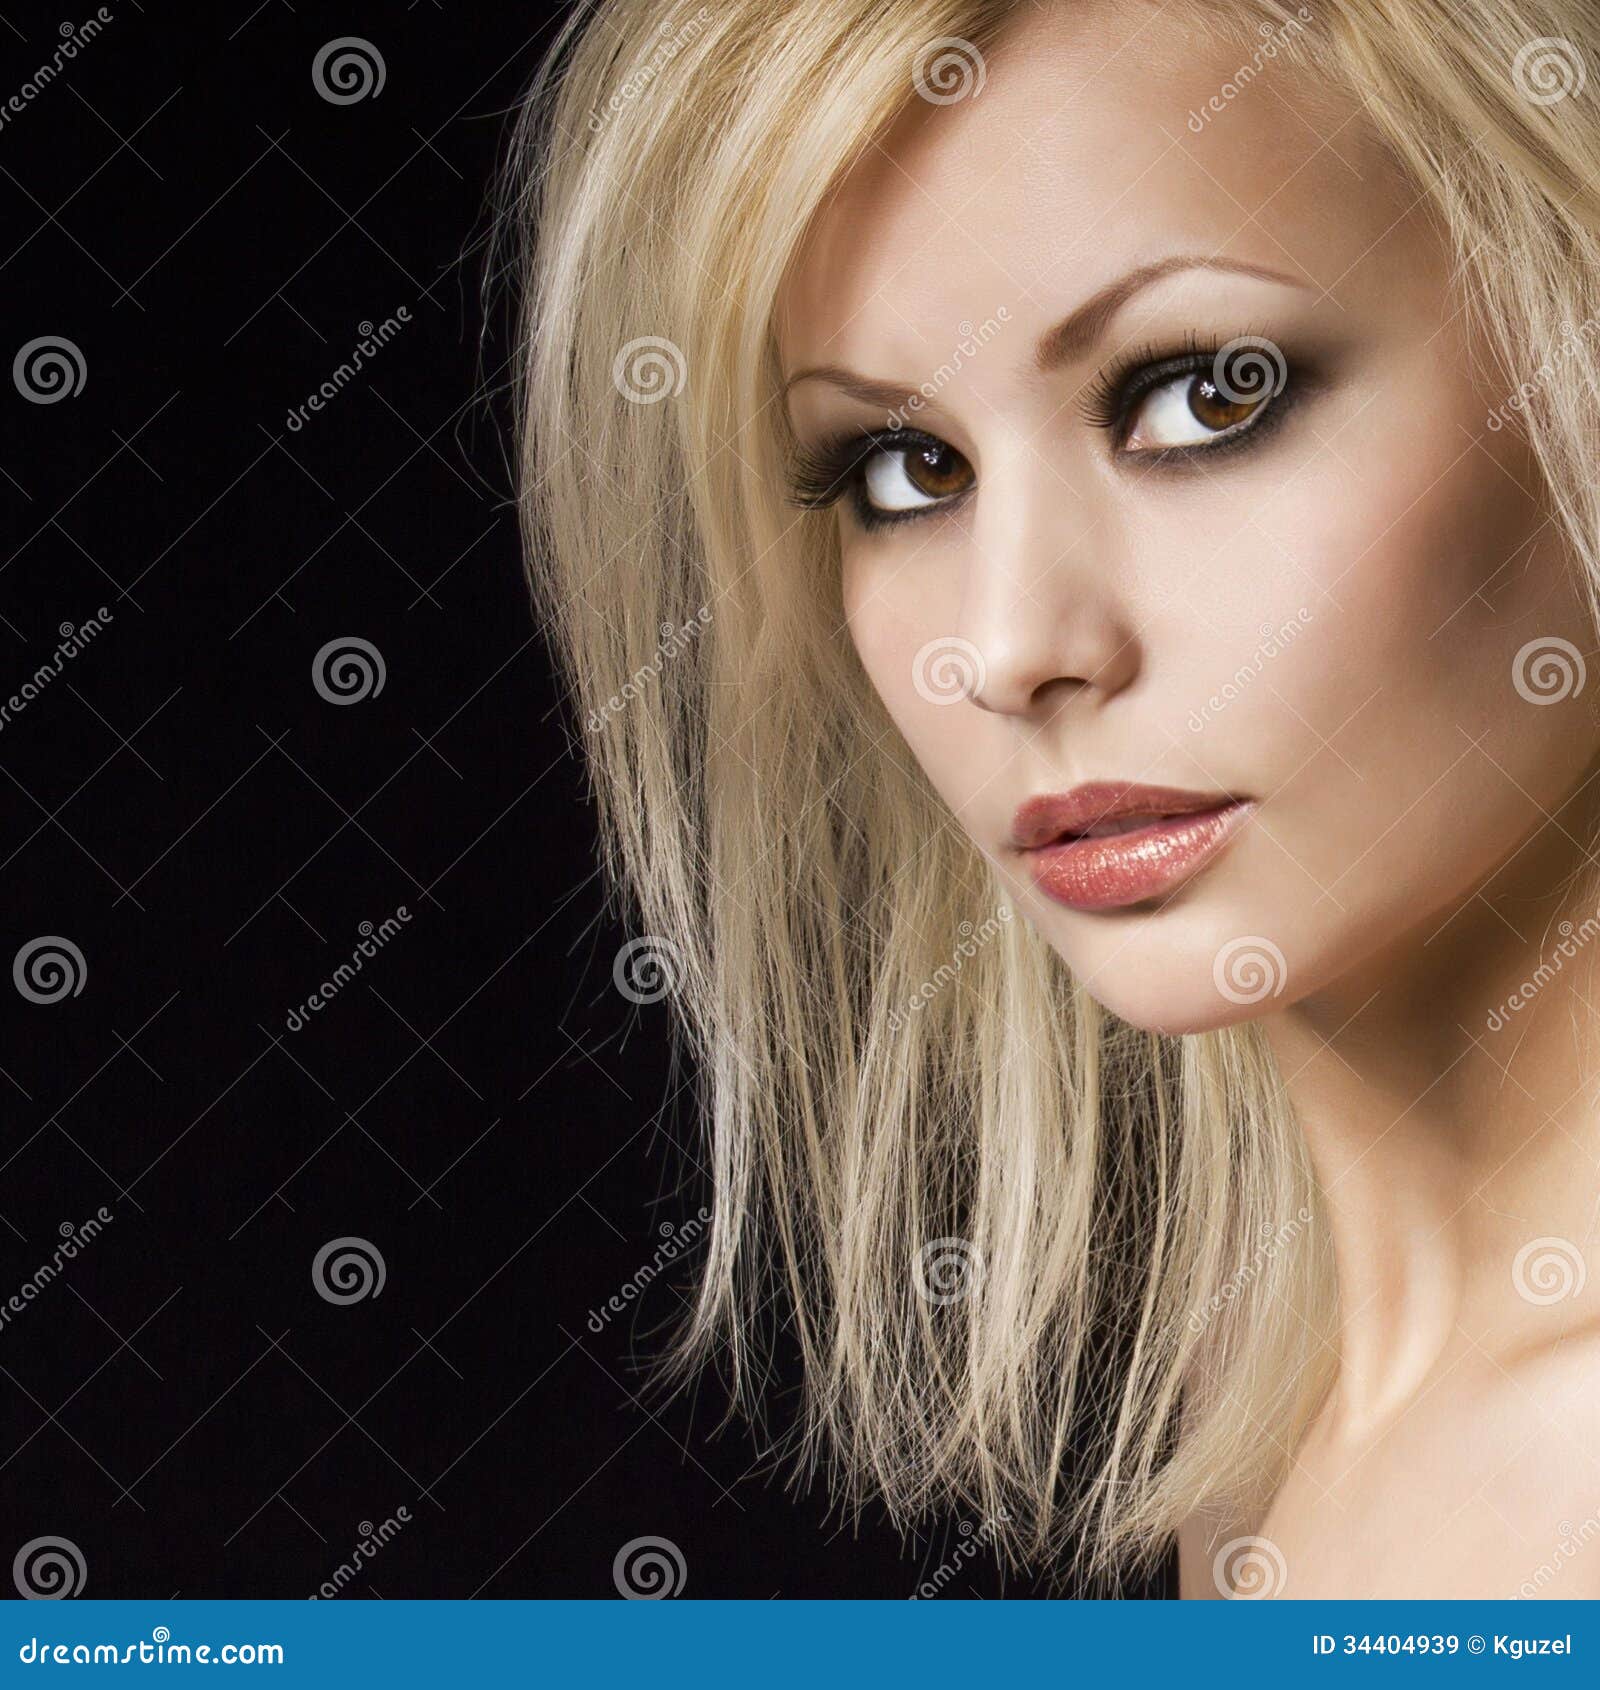 fashion portrait. beautiful blonde woman with professional makeup and hairstyle, over black. vogue style model